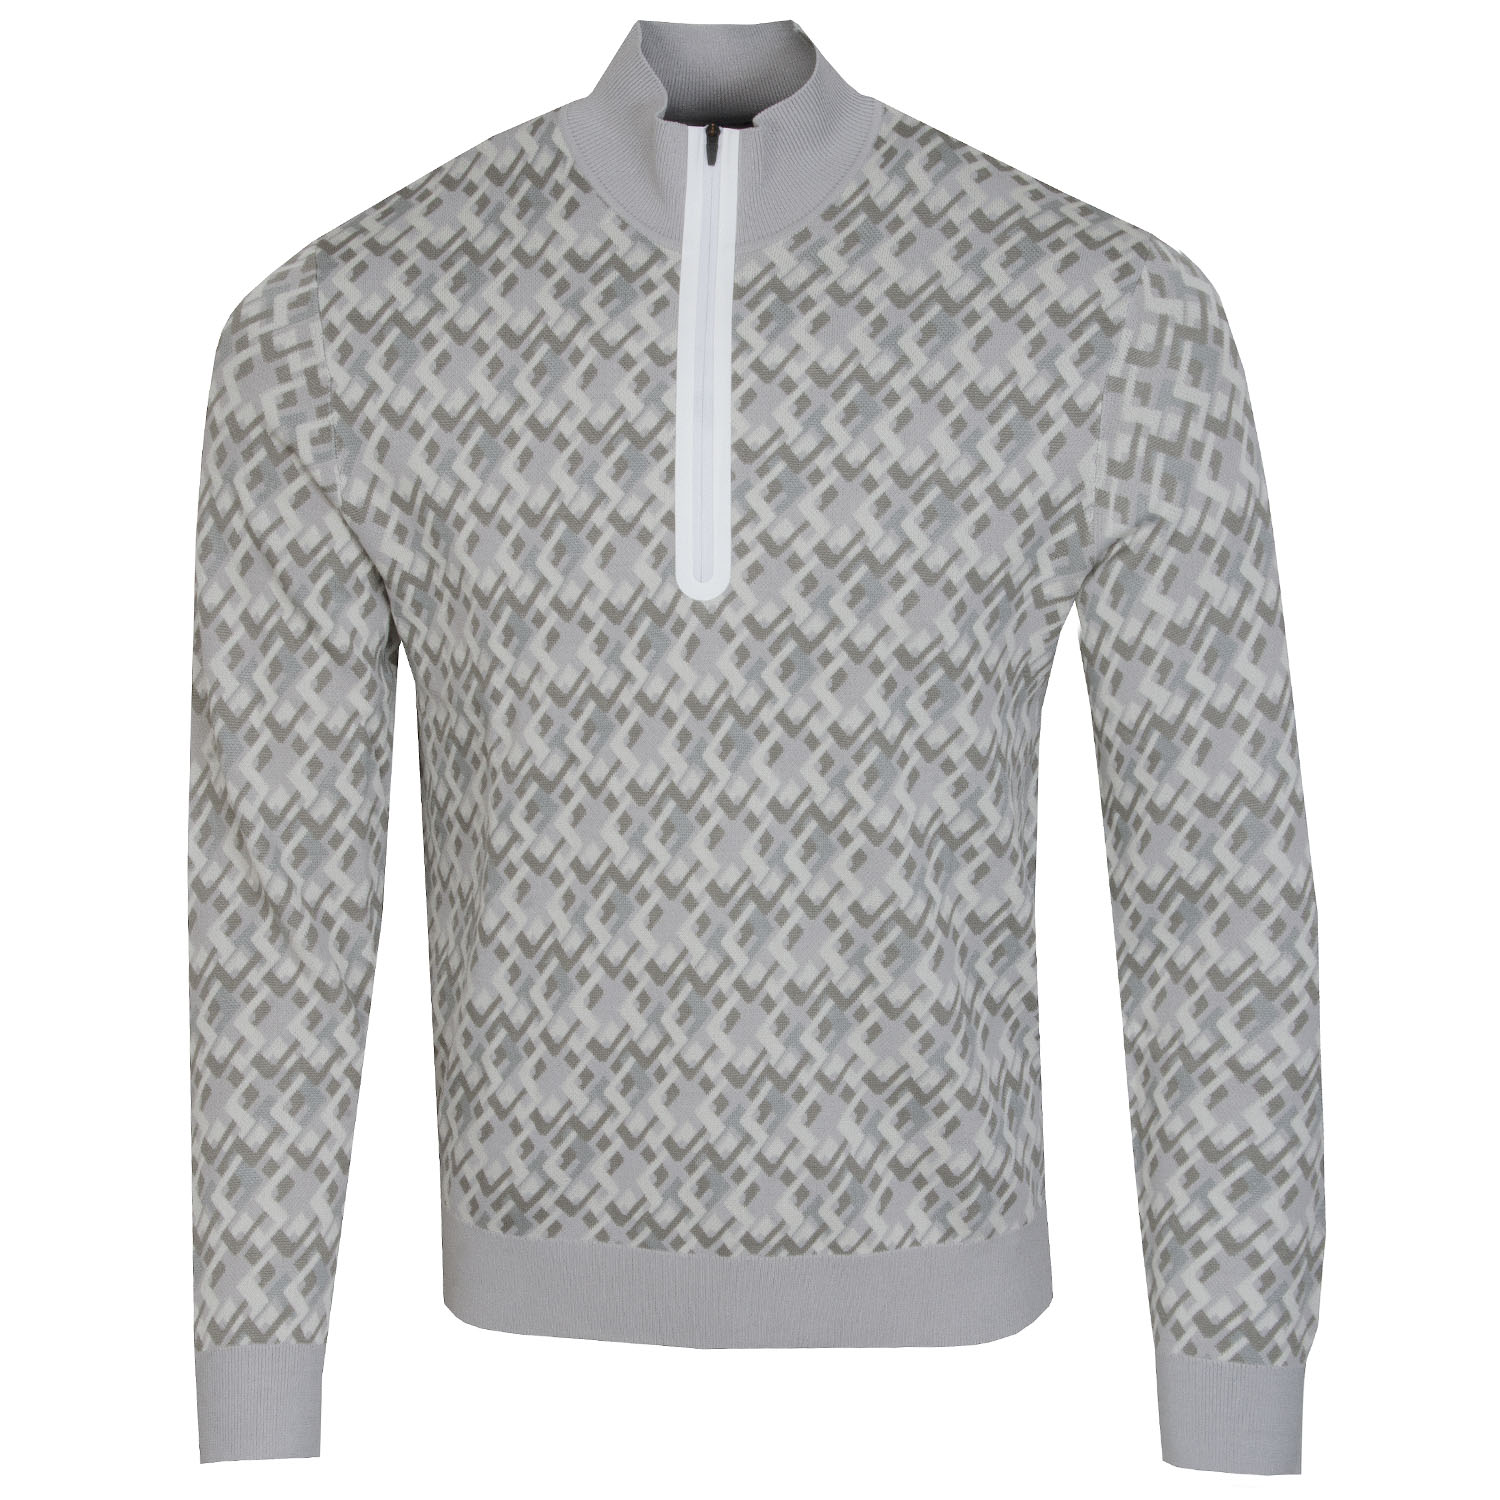 J Lindeberg Nate Knitted Sweater